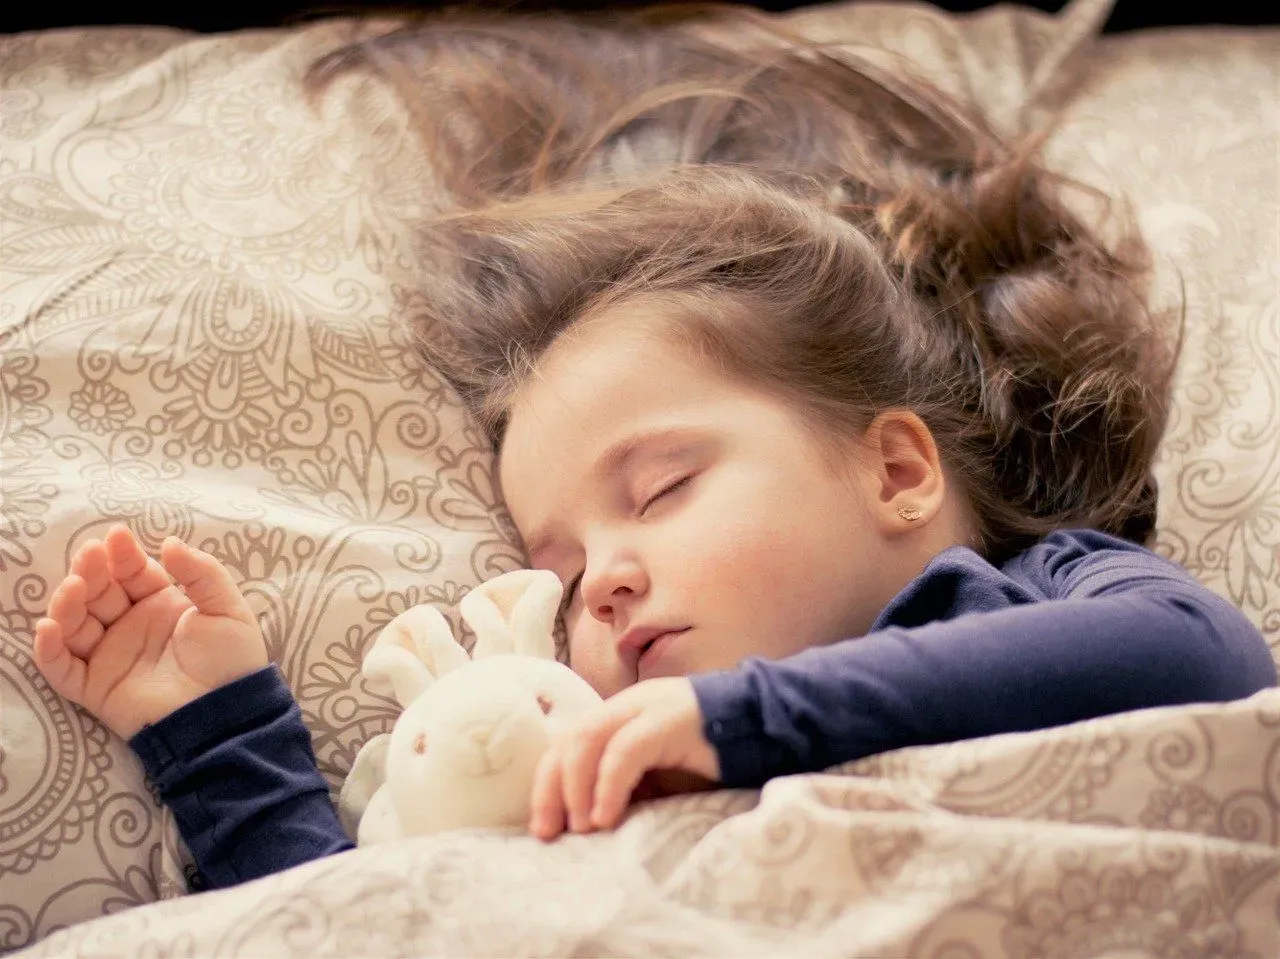 It's normal for your child's sleep pattern to be disrupted during a growth spurt.